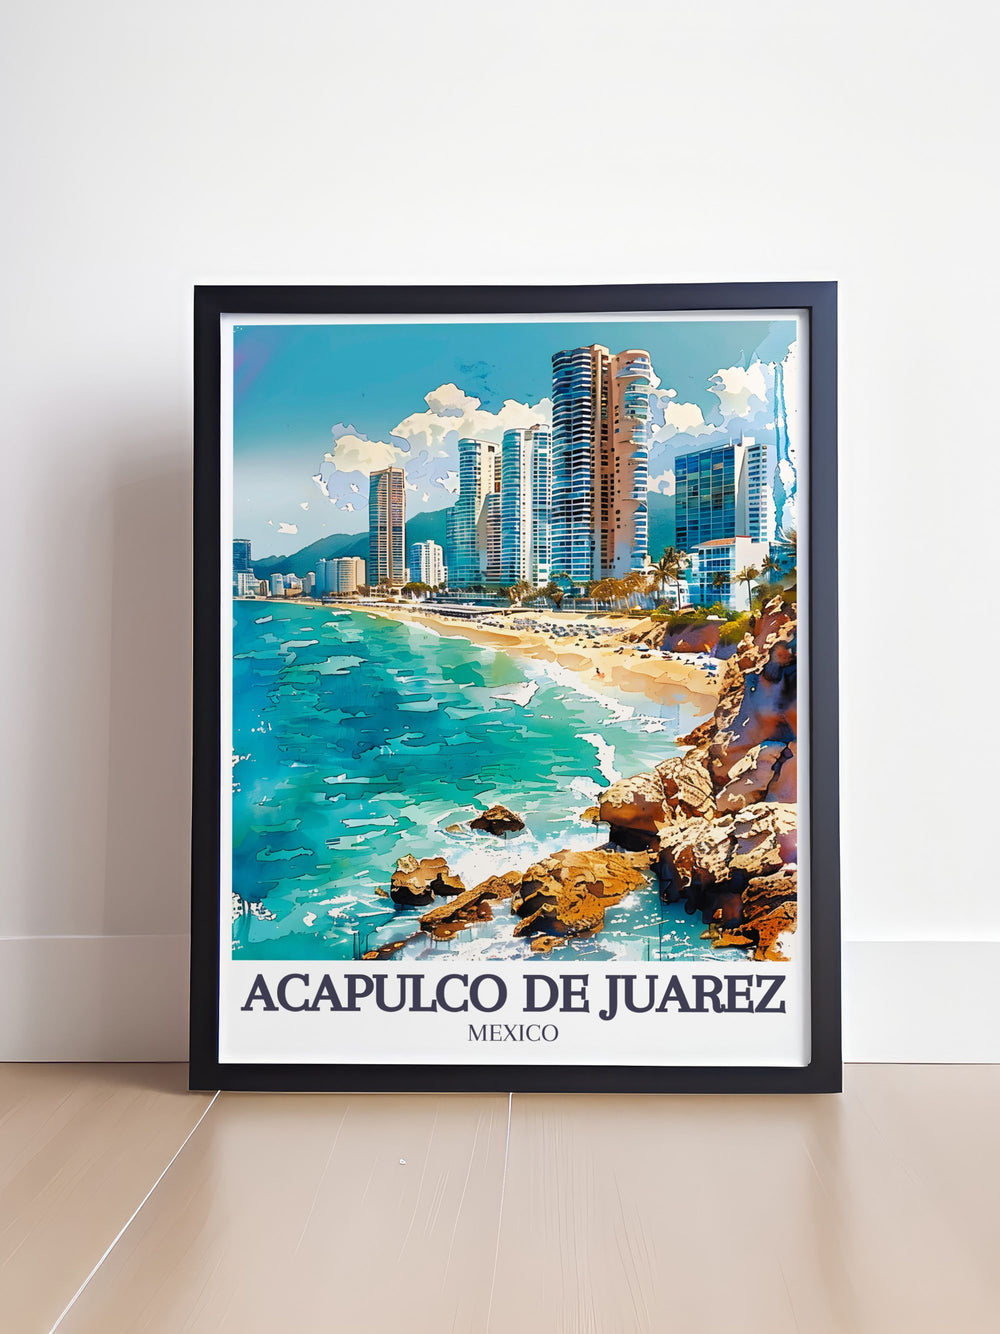 The historical significance and vibrant culture of Acapulco de Juárez are highlighted in this travel poster, celebrating the citys rich heritage and scenic beauty.